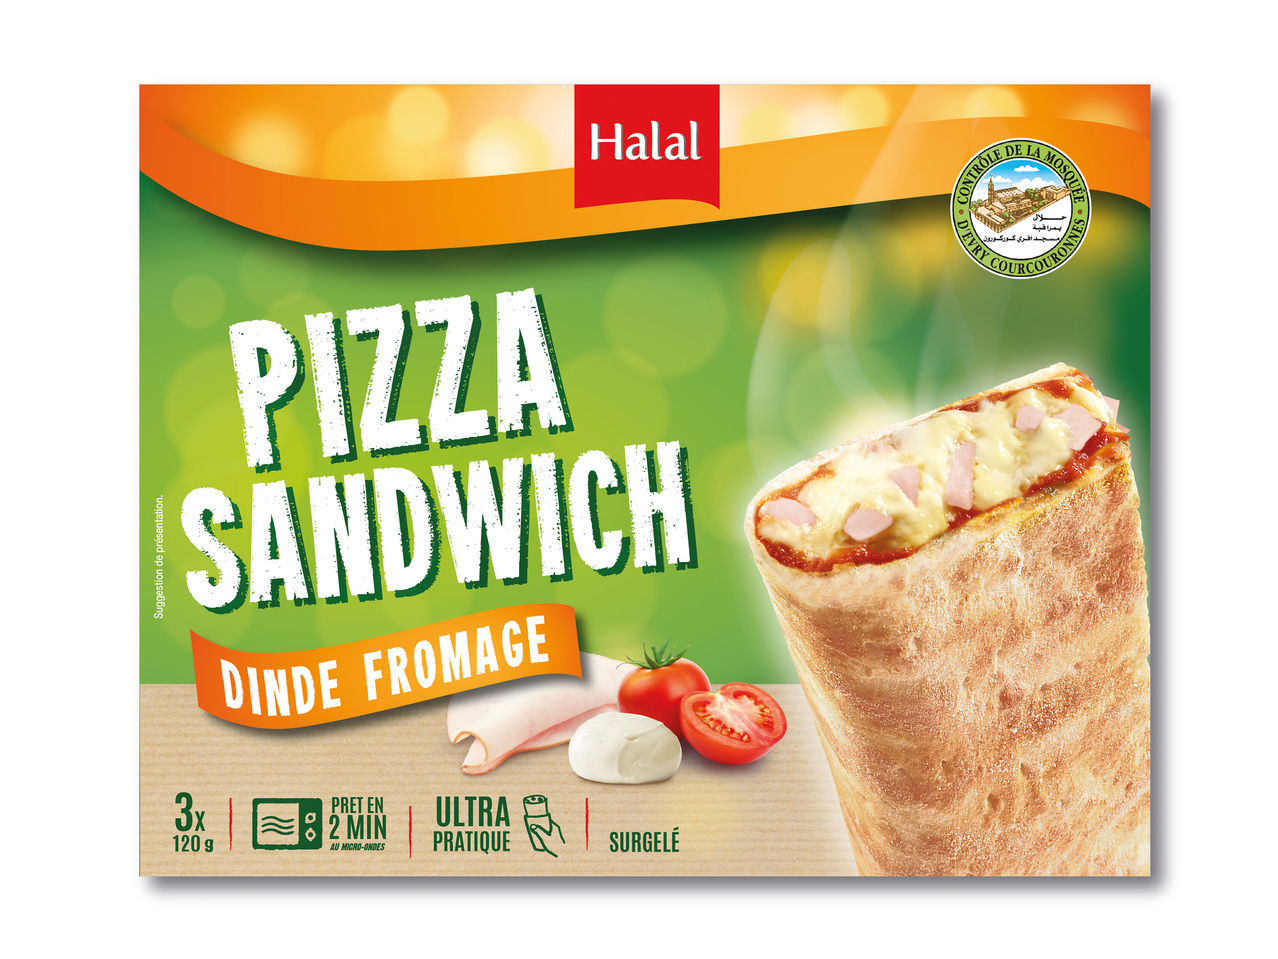 Pizza Sandwich halal dinde fromage1